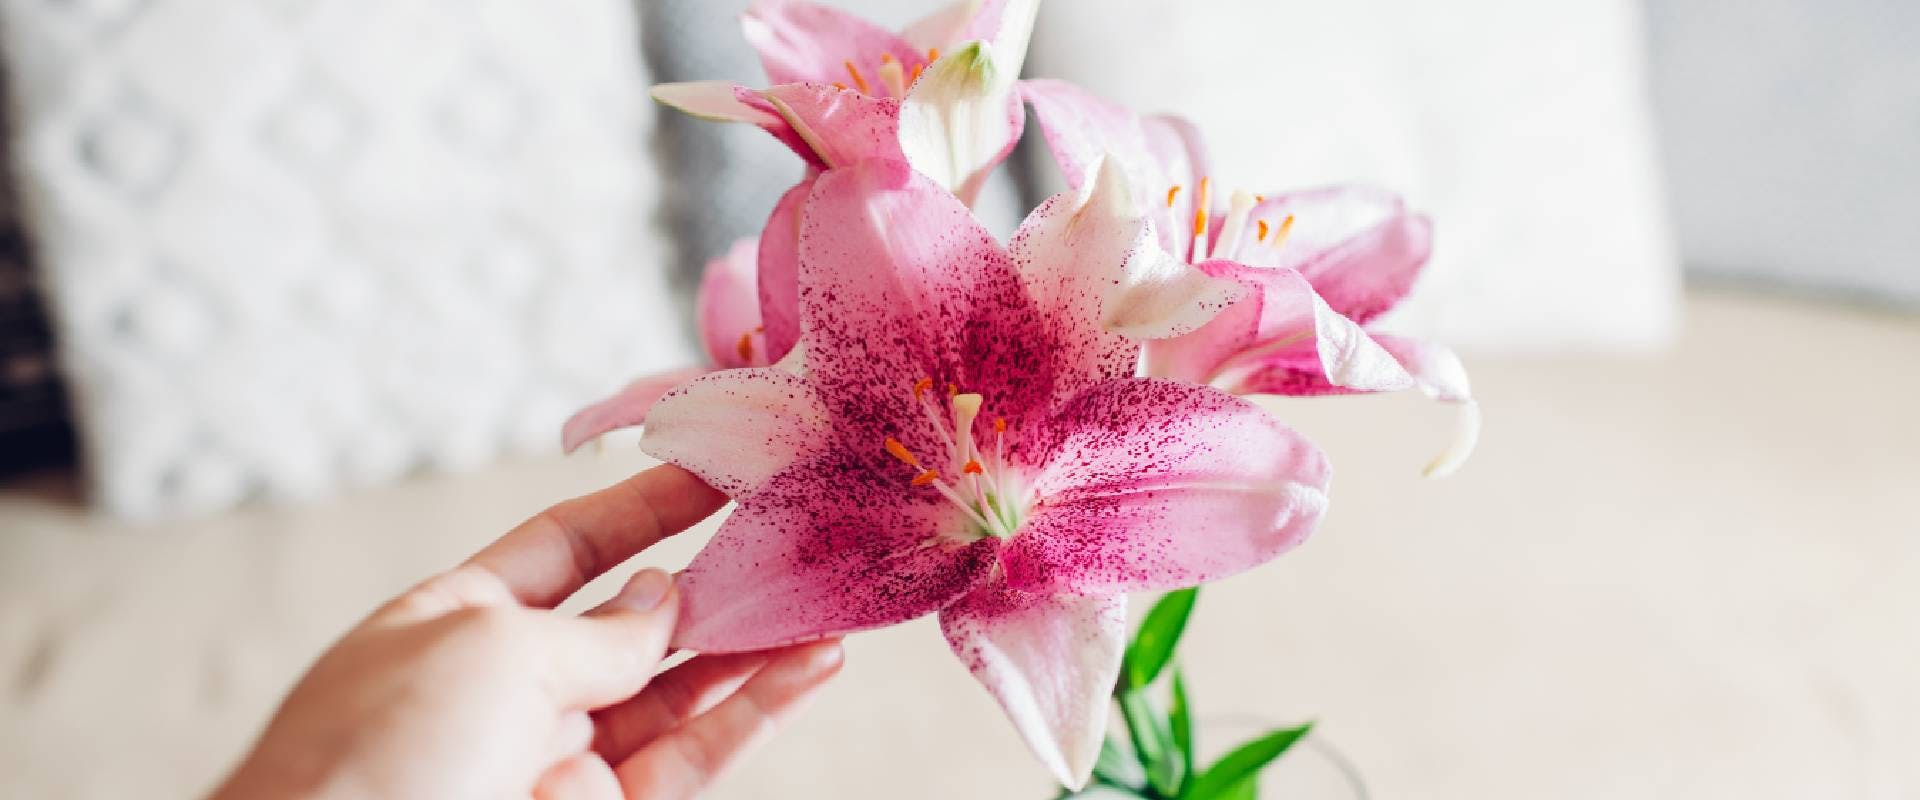 Are Lilies Poisonous To Dogs? | Trustedhousesitters.Com